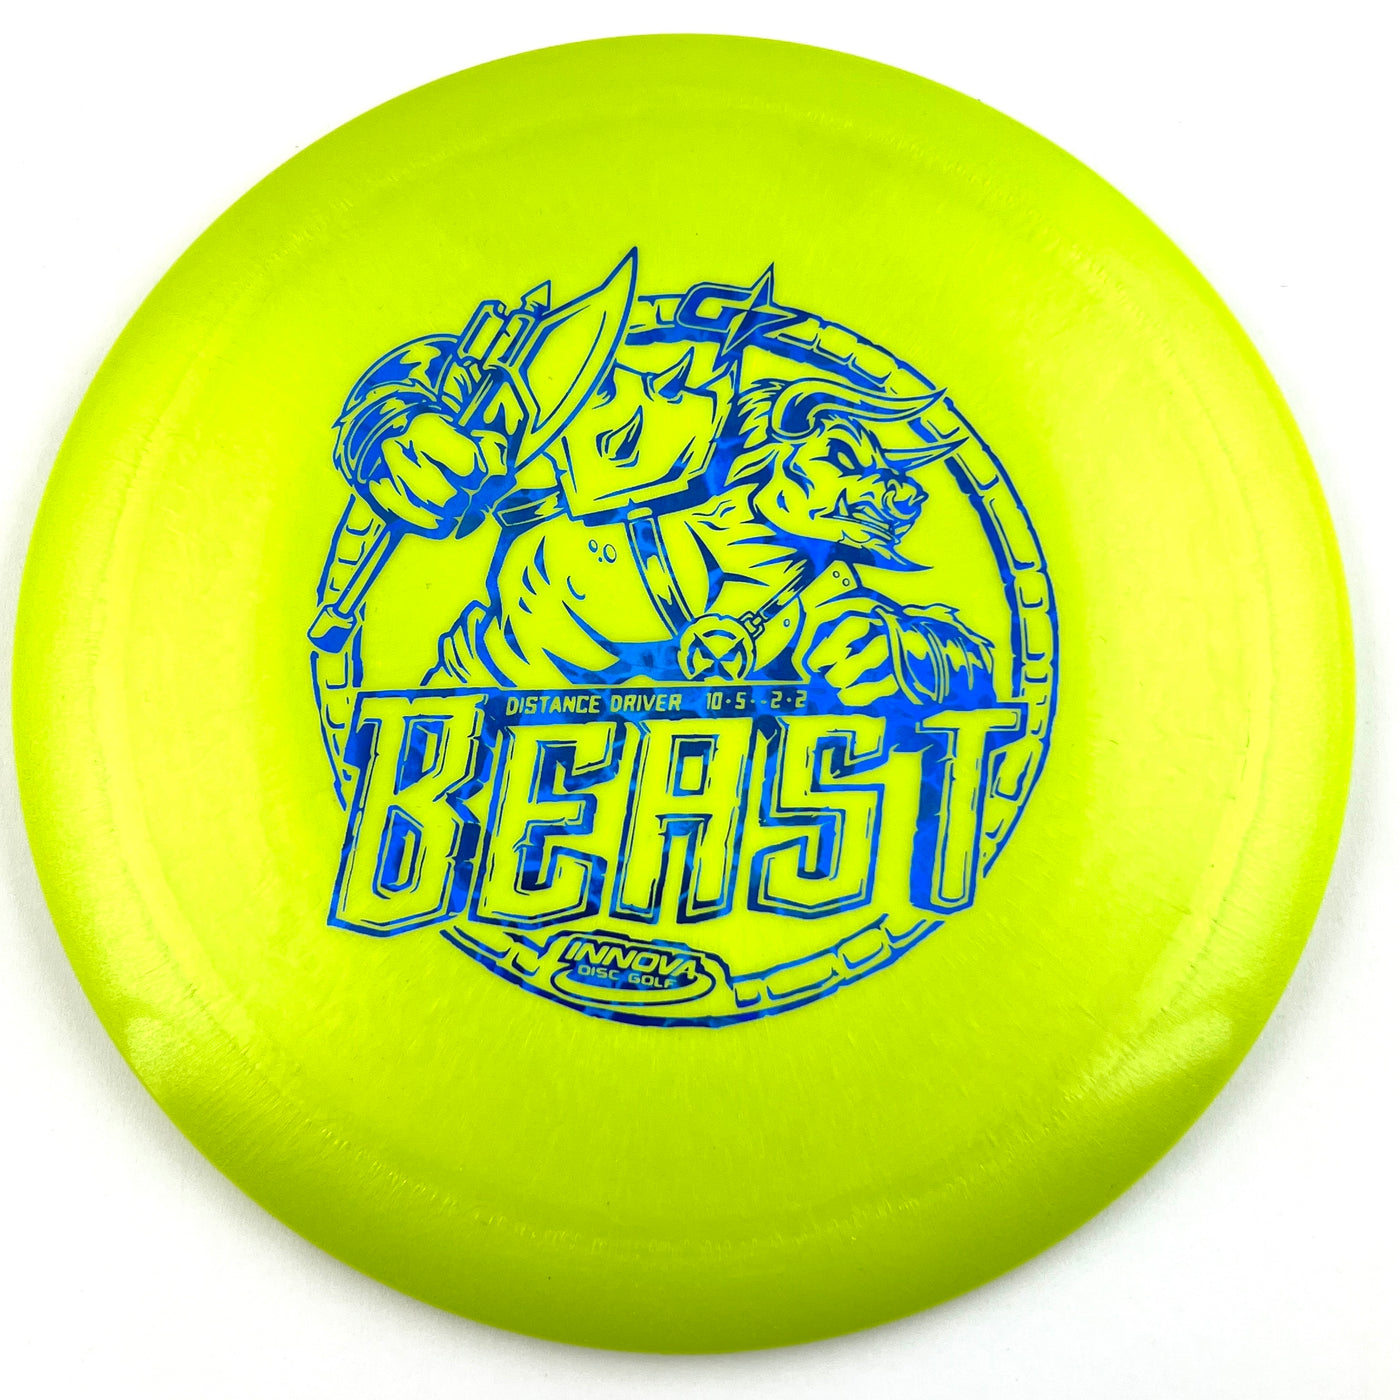 Innova Gstar Beast Distance Driver with Stock Character Stamp - Speed 10